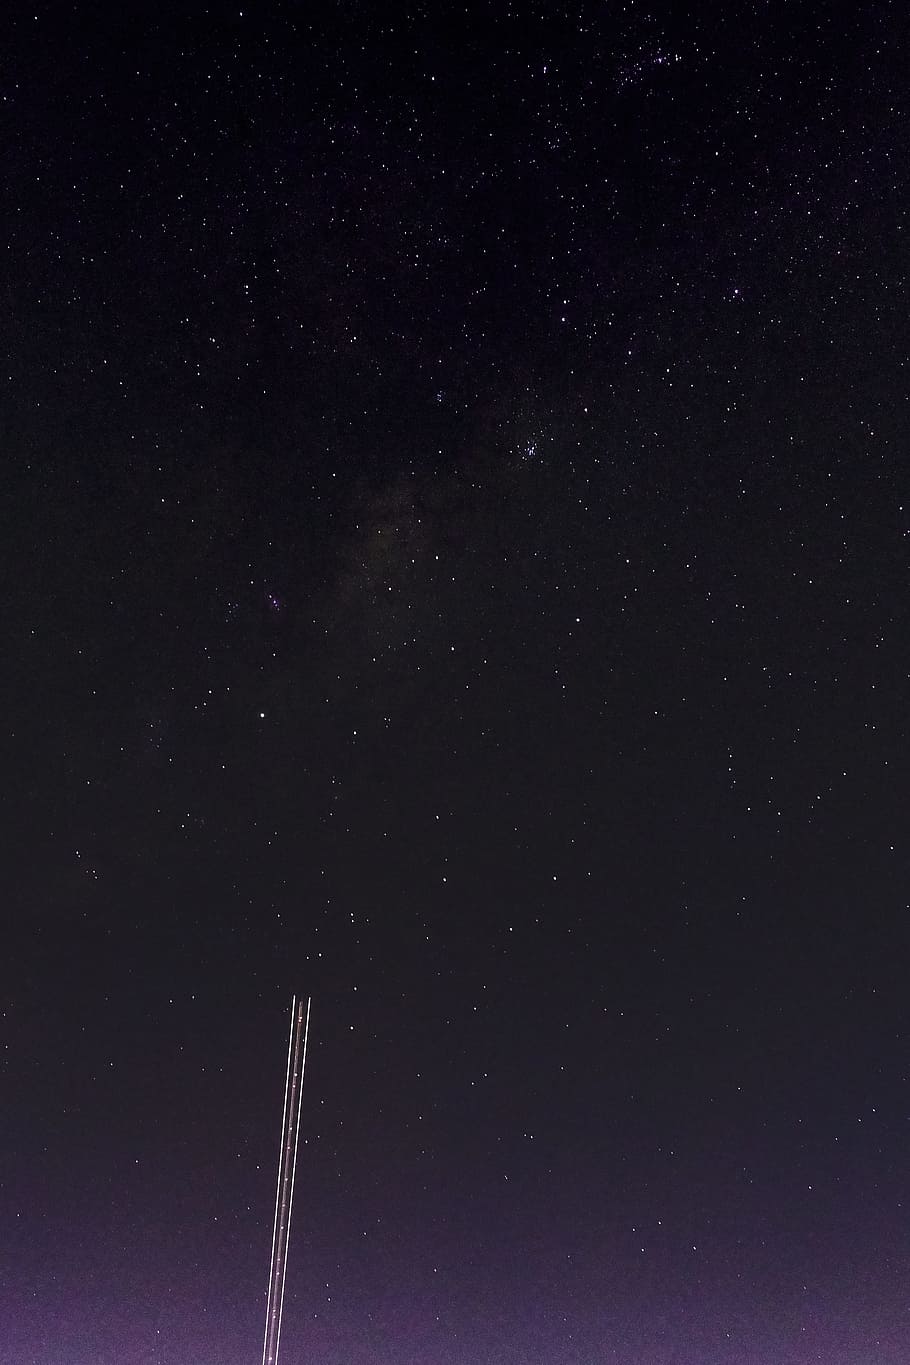 stars at nighttime, sky, star, long exposure, astrophotography, minimal, looking up, galaxy, CC public domain, royalty free